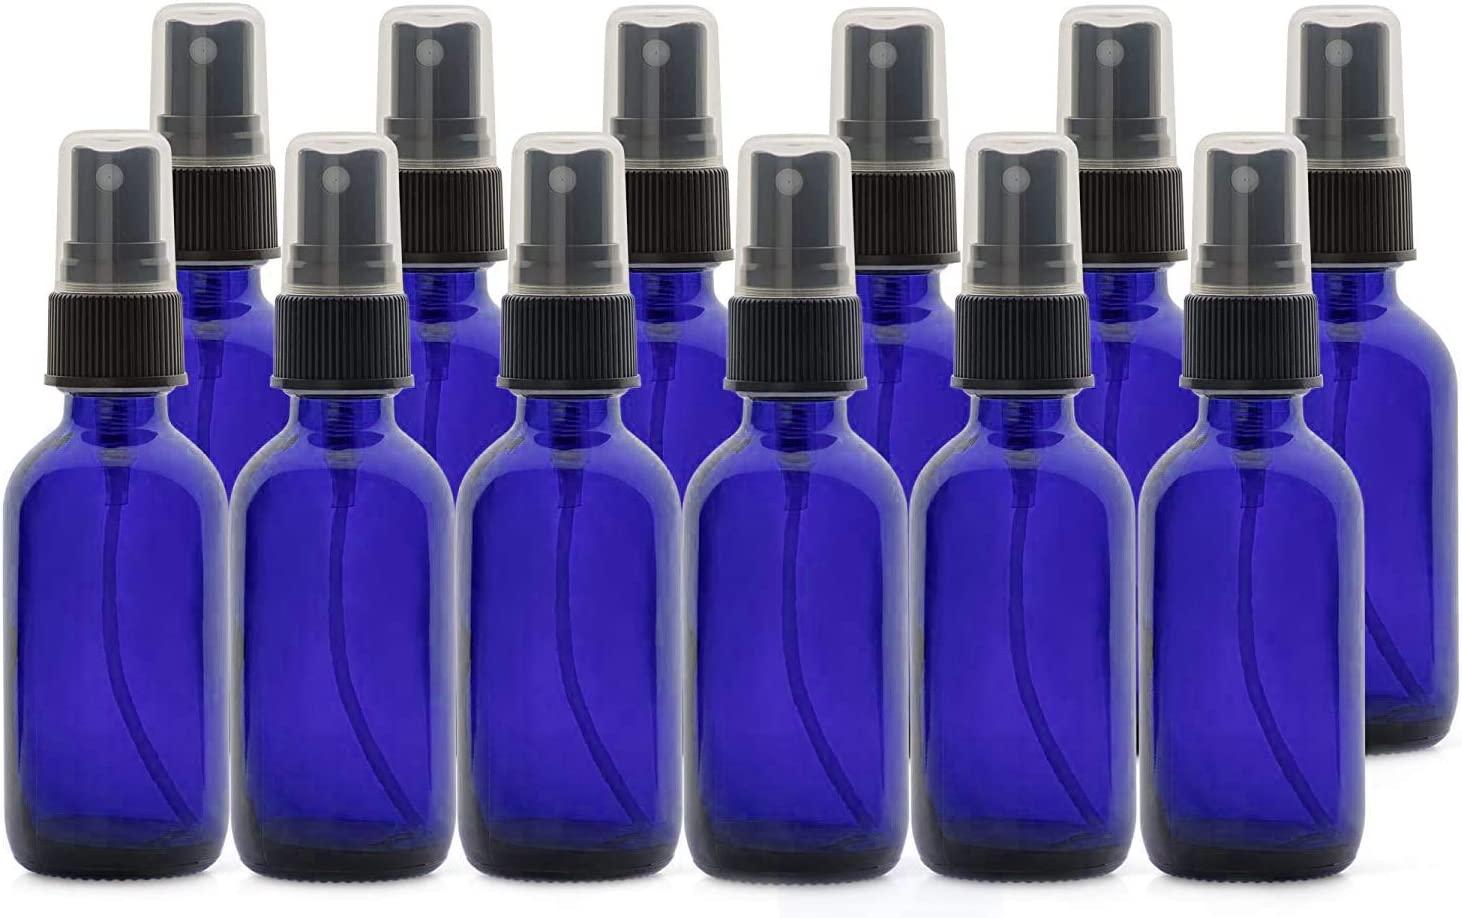 High Quality Essential Oil blue glass Spray Bottles two pack. 2